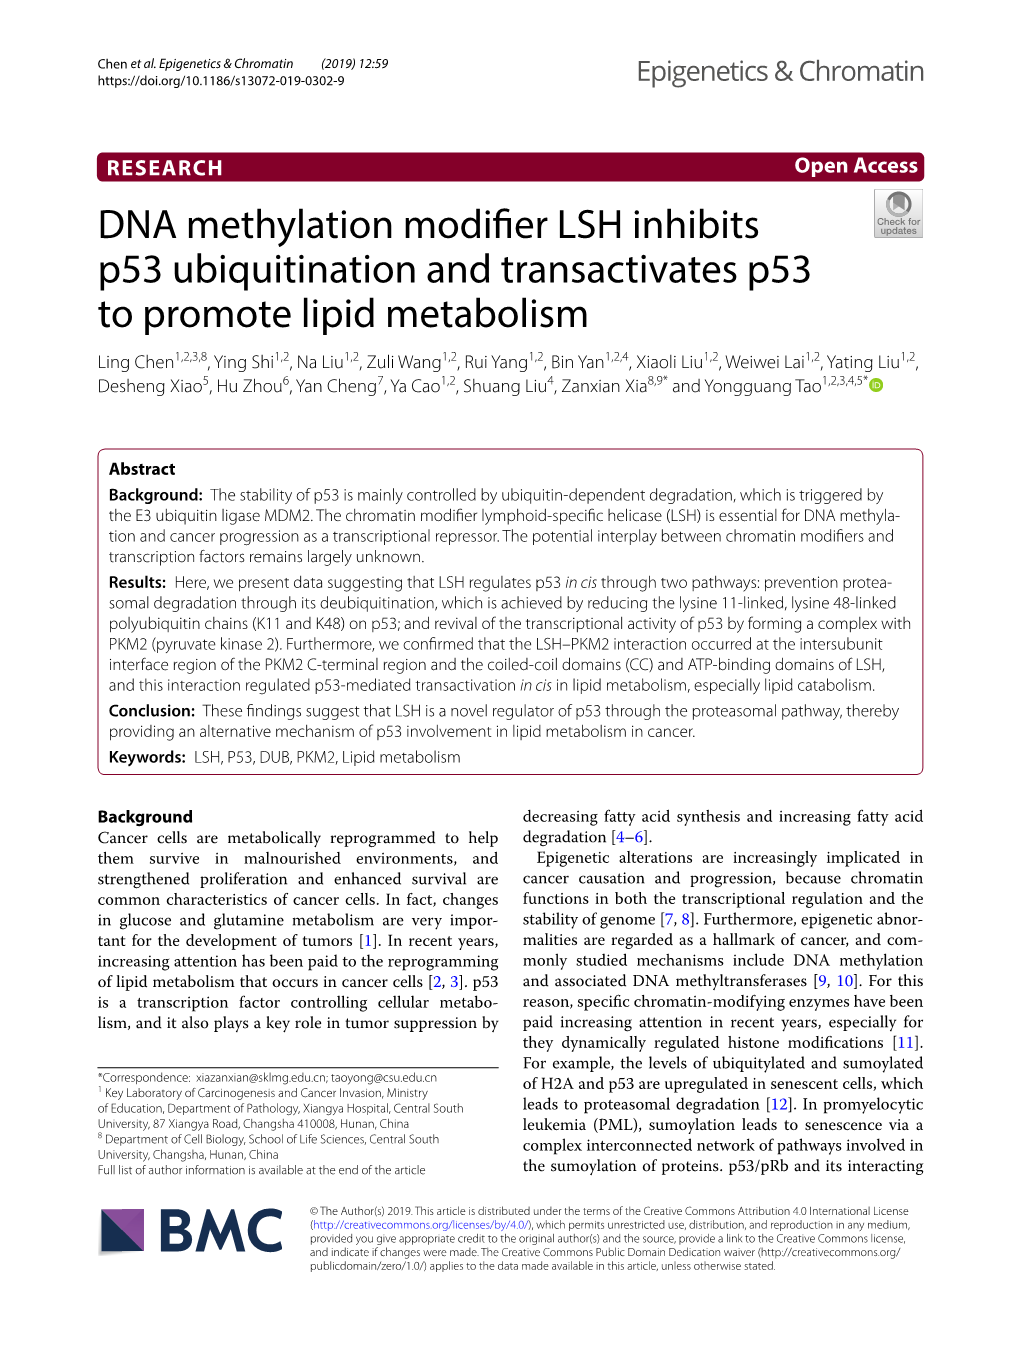 DNA Methylation Modifier LSH Inhibits P53 Ubiquitination And